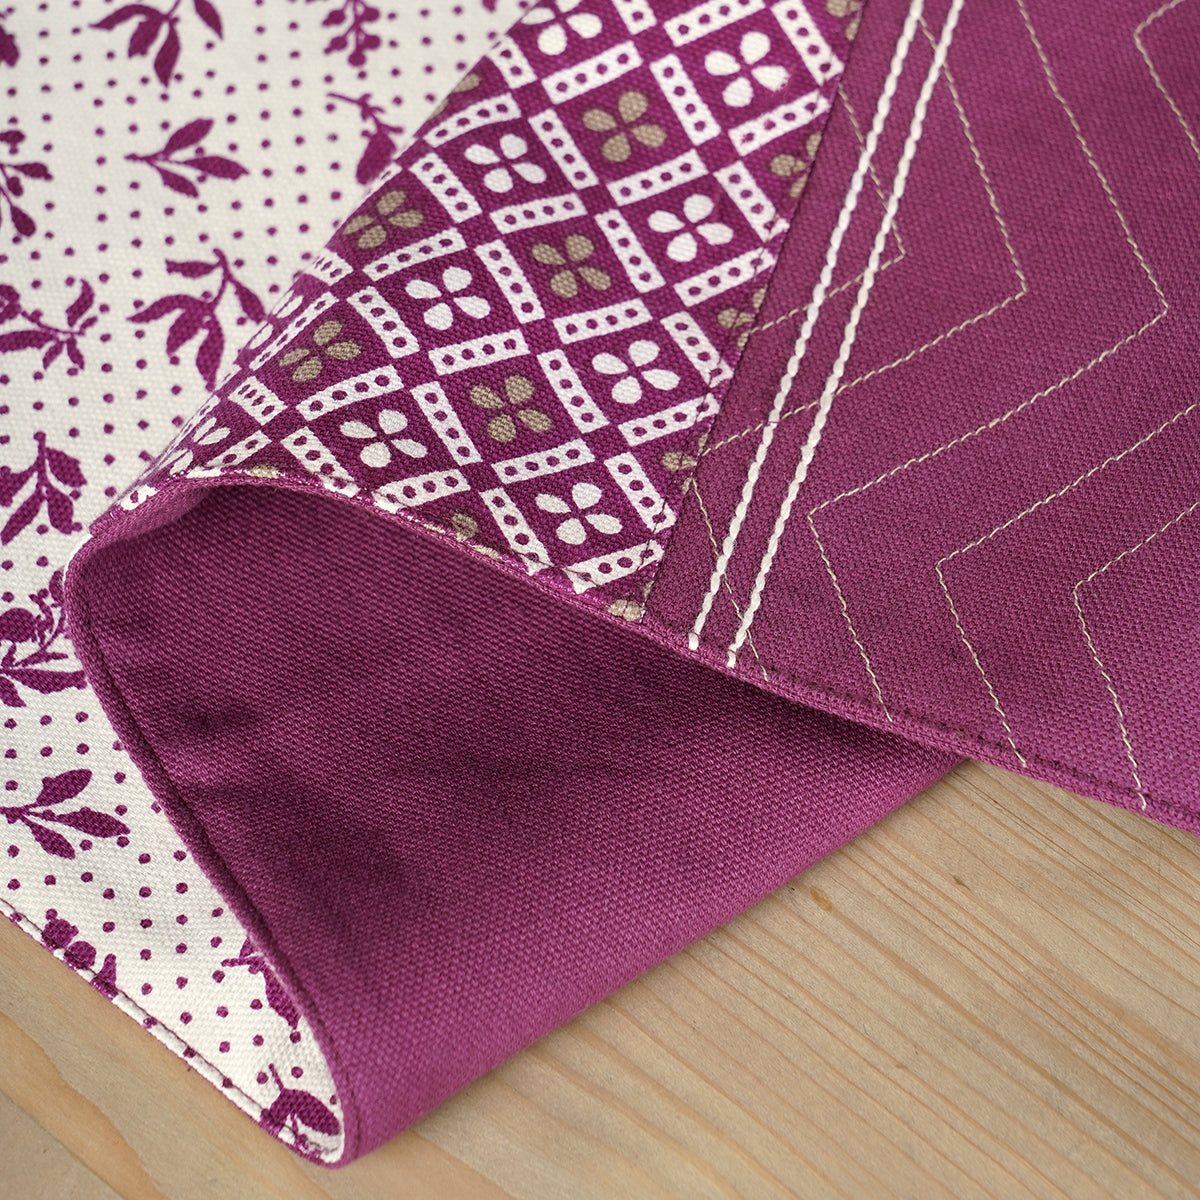 Maroon cotton table runner, geometrical and floral print with patchwork, table decor, sizes available